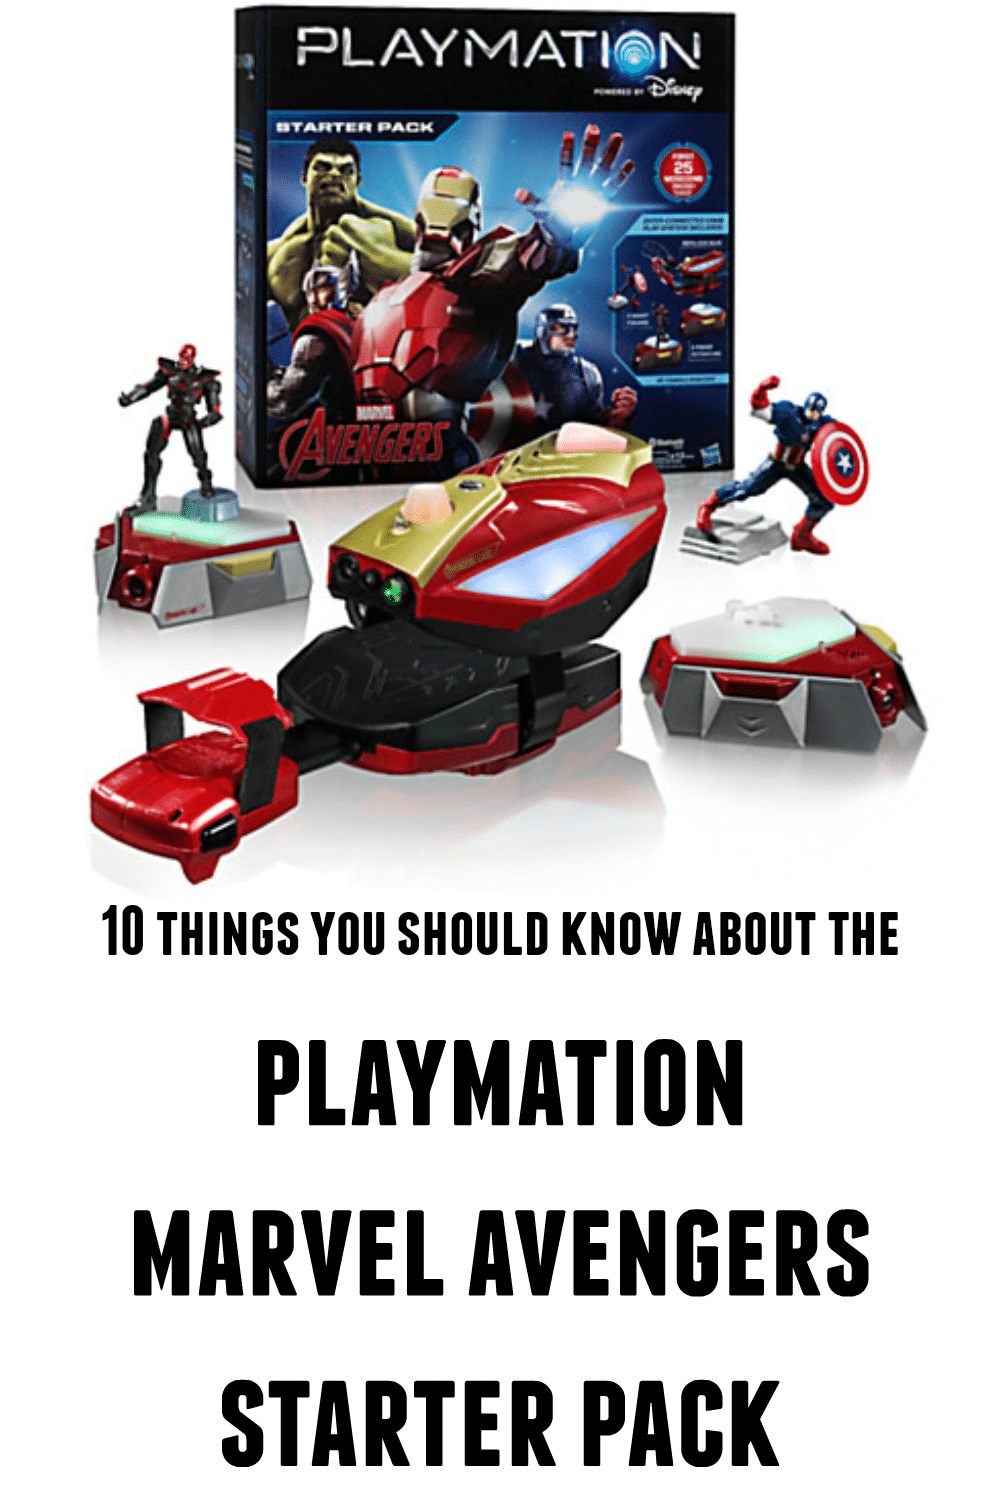 10 Things You Should Know about the Playmation Marvel Avengers